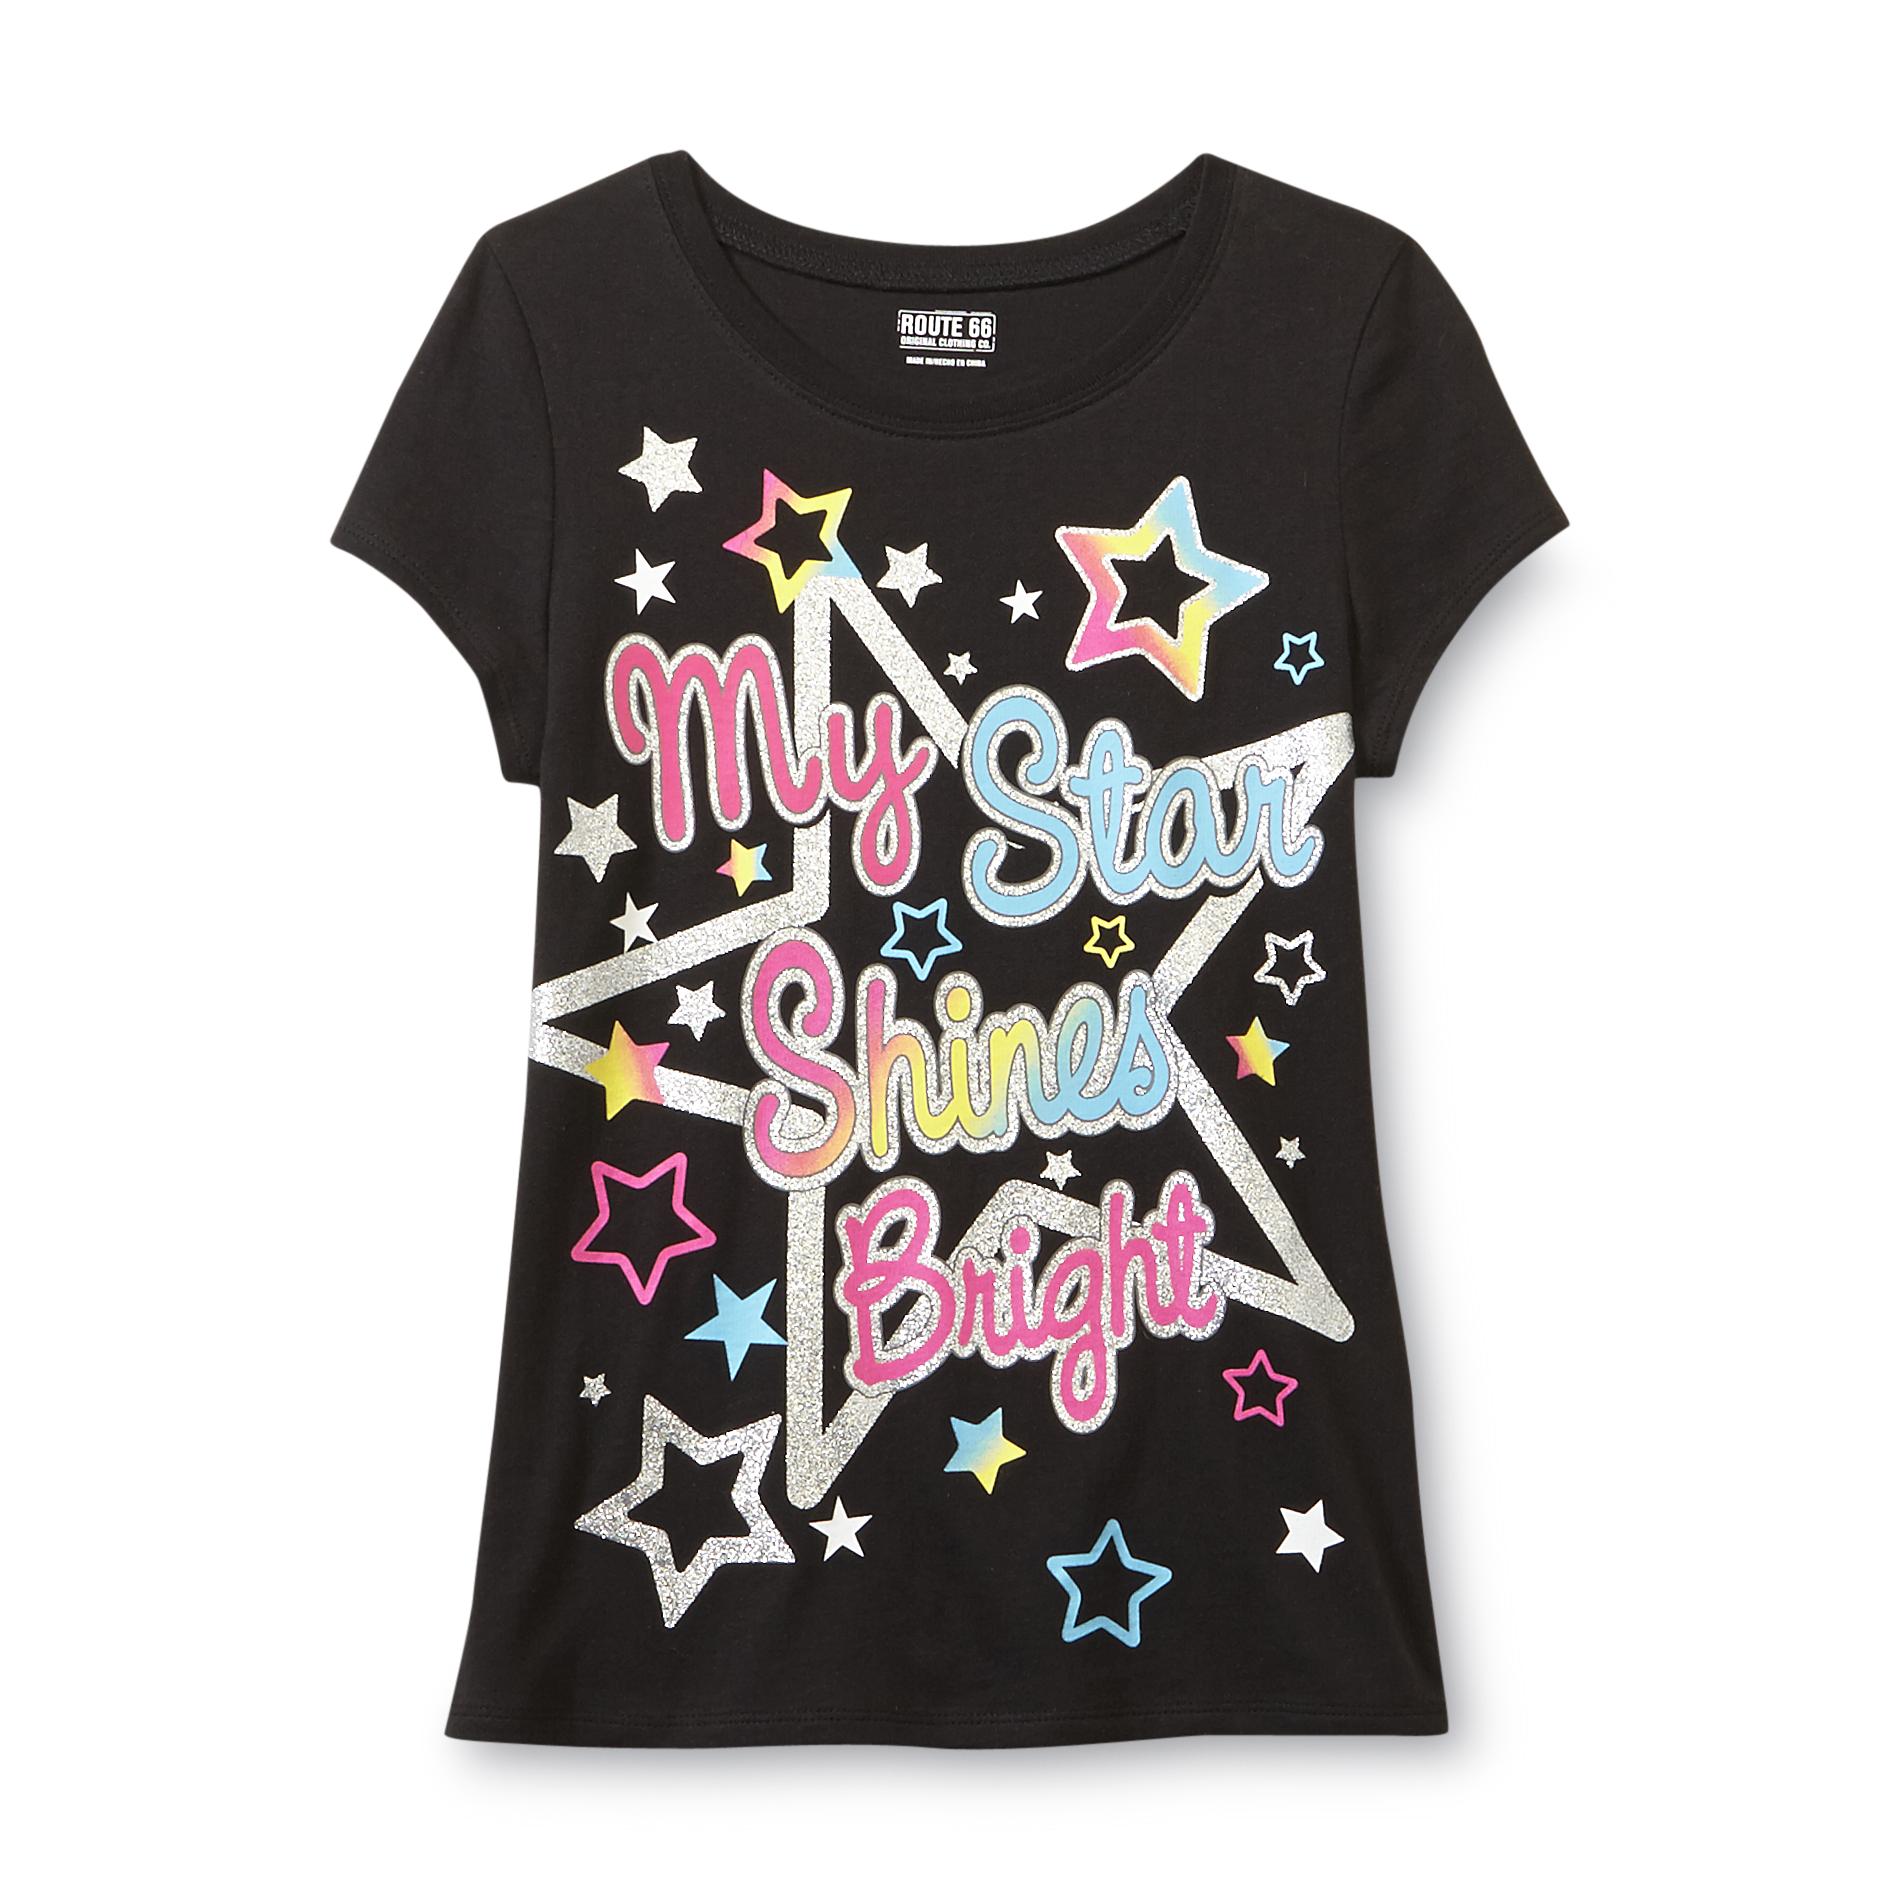 Route 66 Girl's Graphic Top - Star